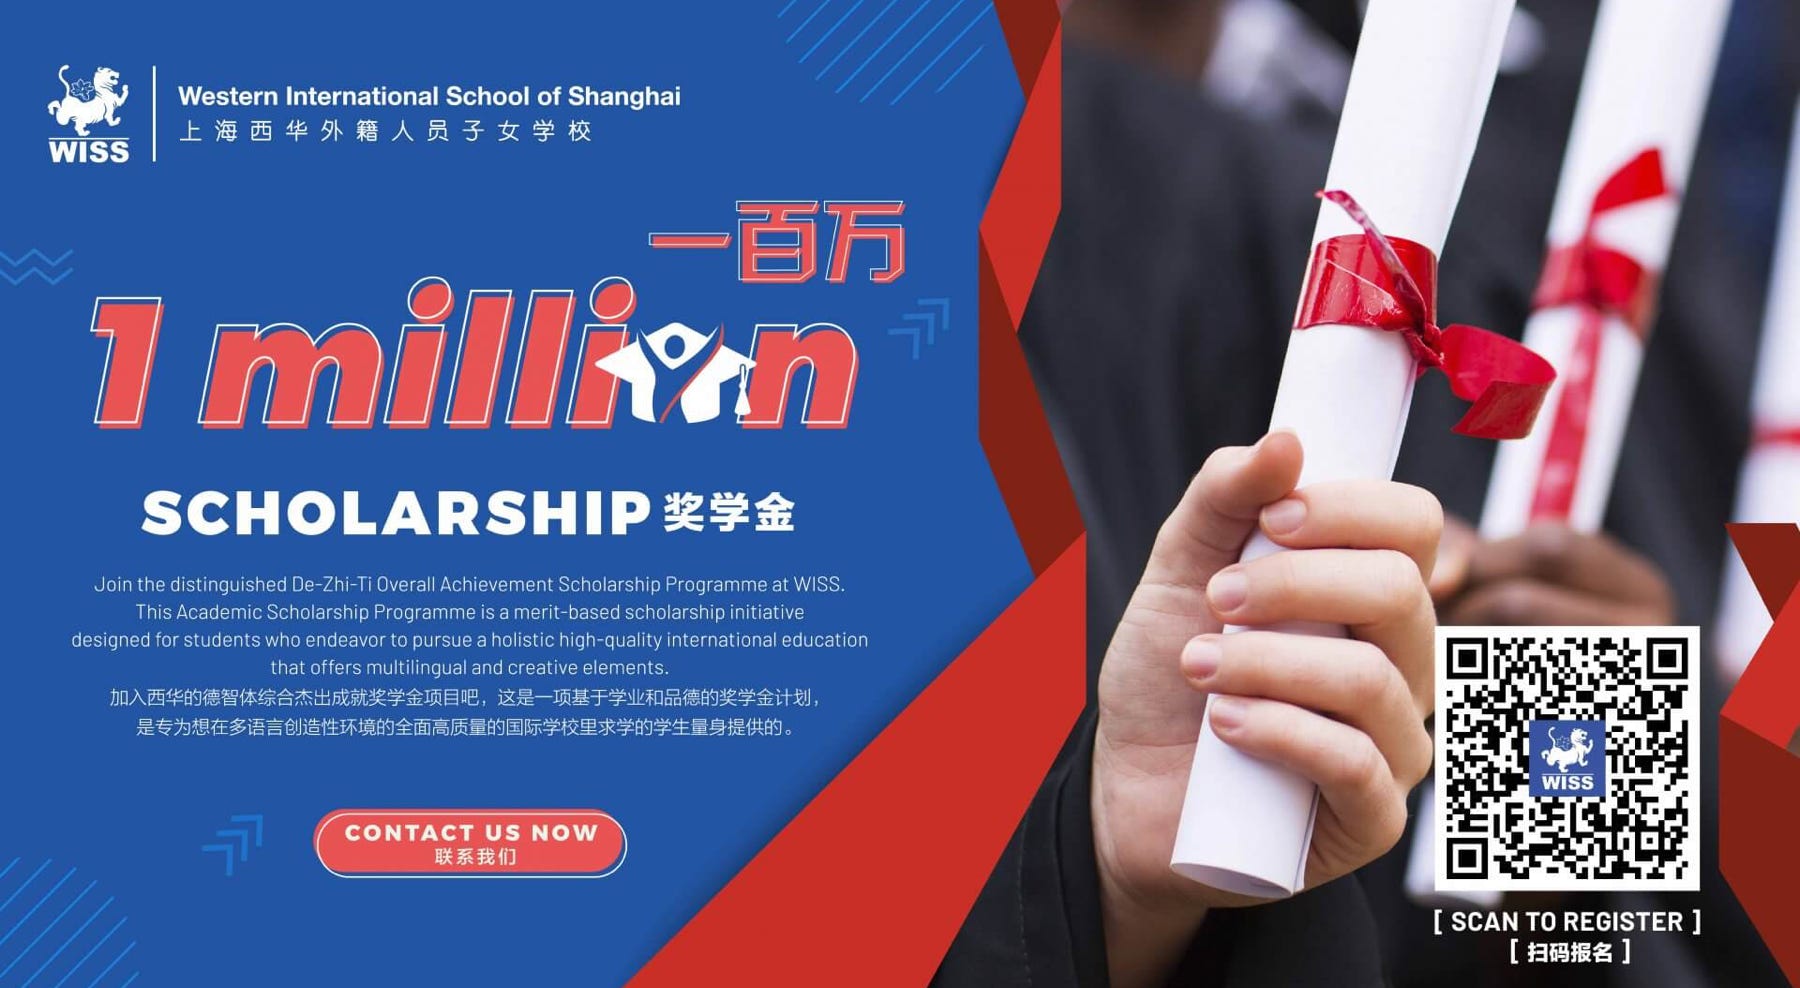 WISS Launches Distinguished 1 Million RMB Merit Scholarship